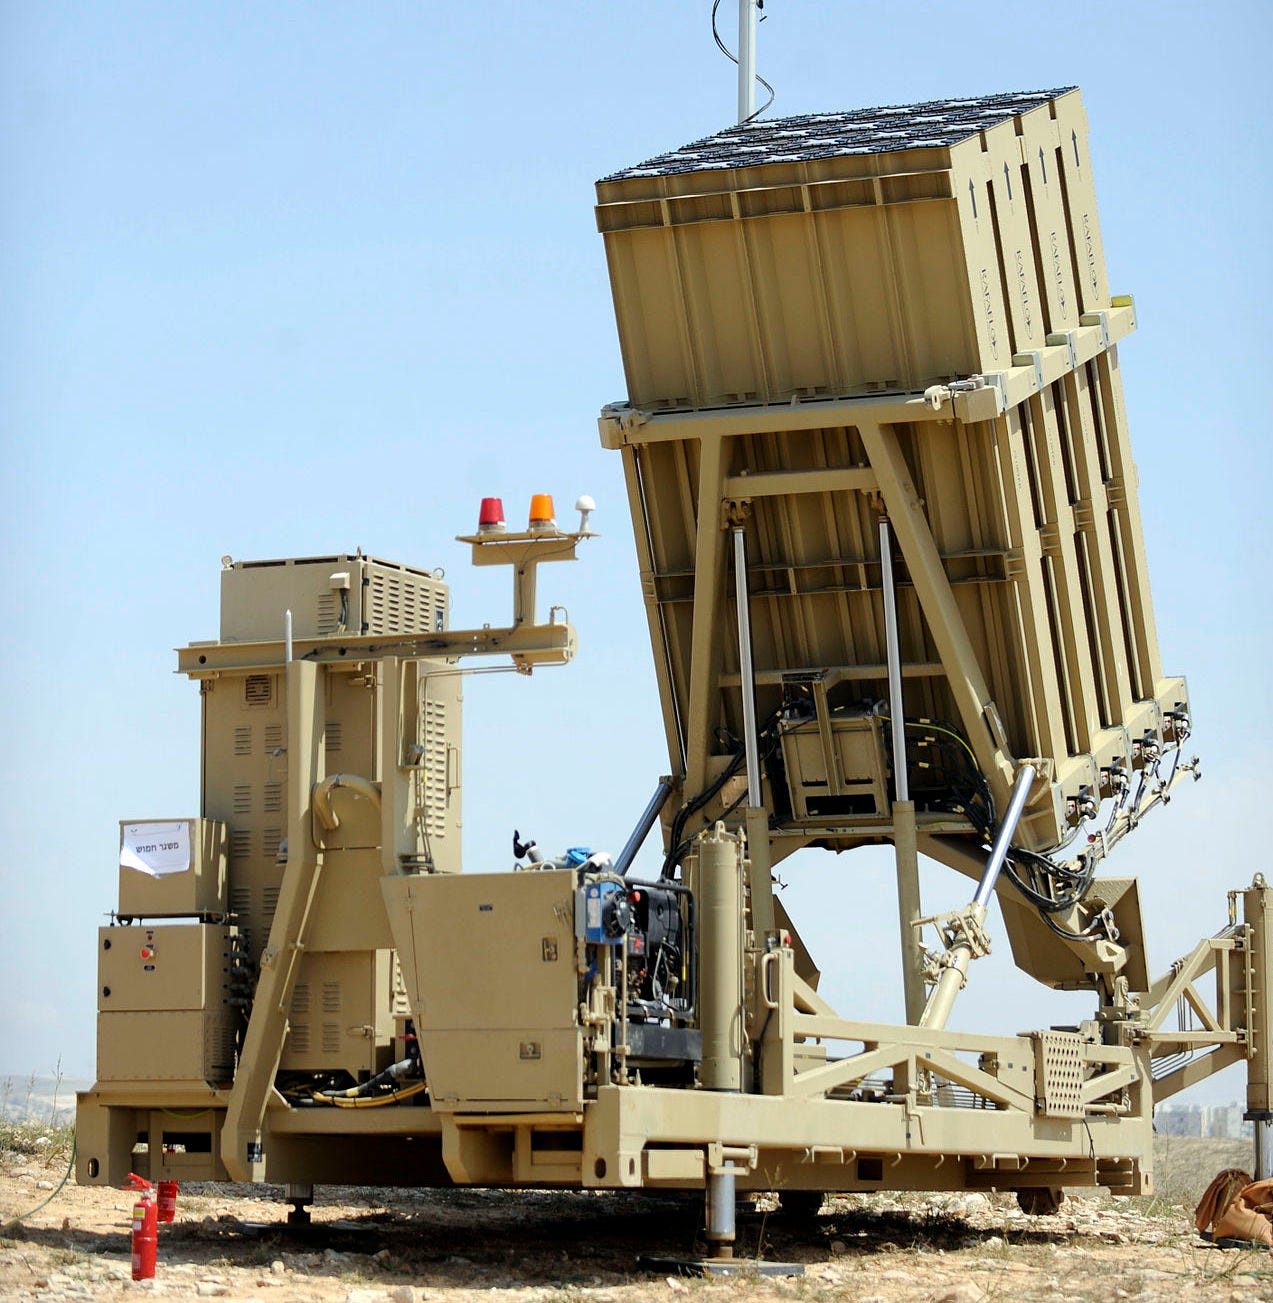 A beige-colored piece of military machinery.